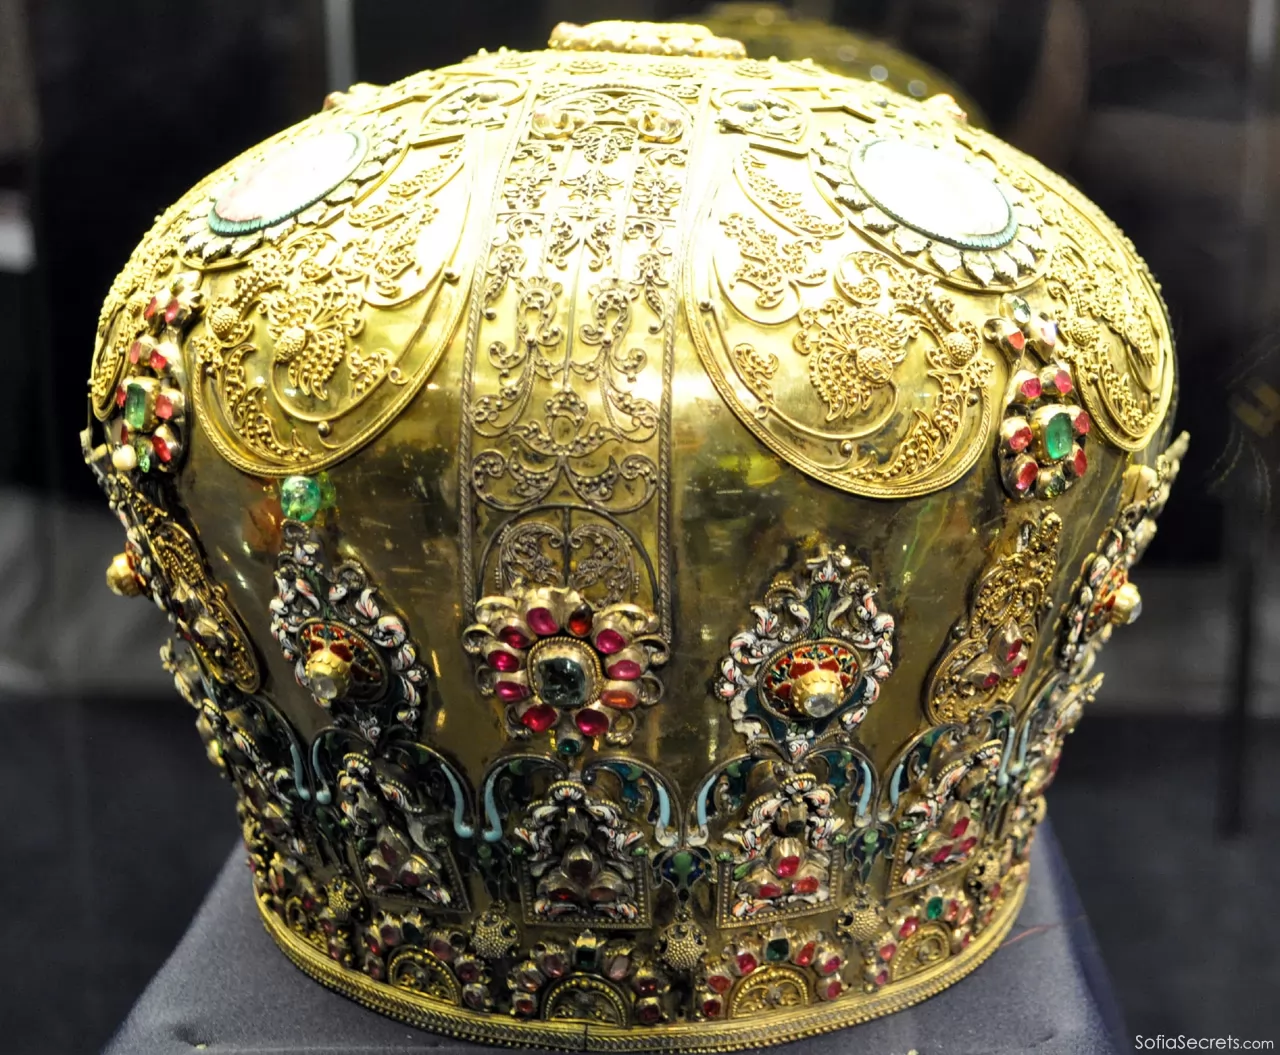 Antique crown of a Bulgarian king in the National historical museum in Sofia